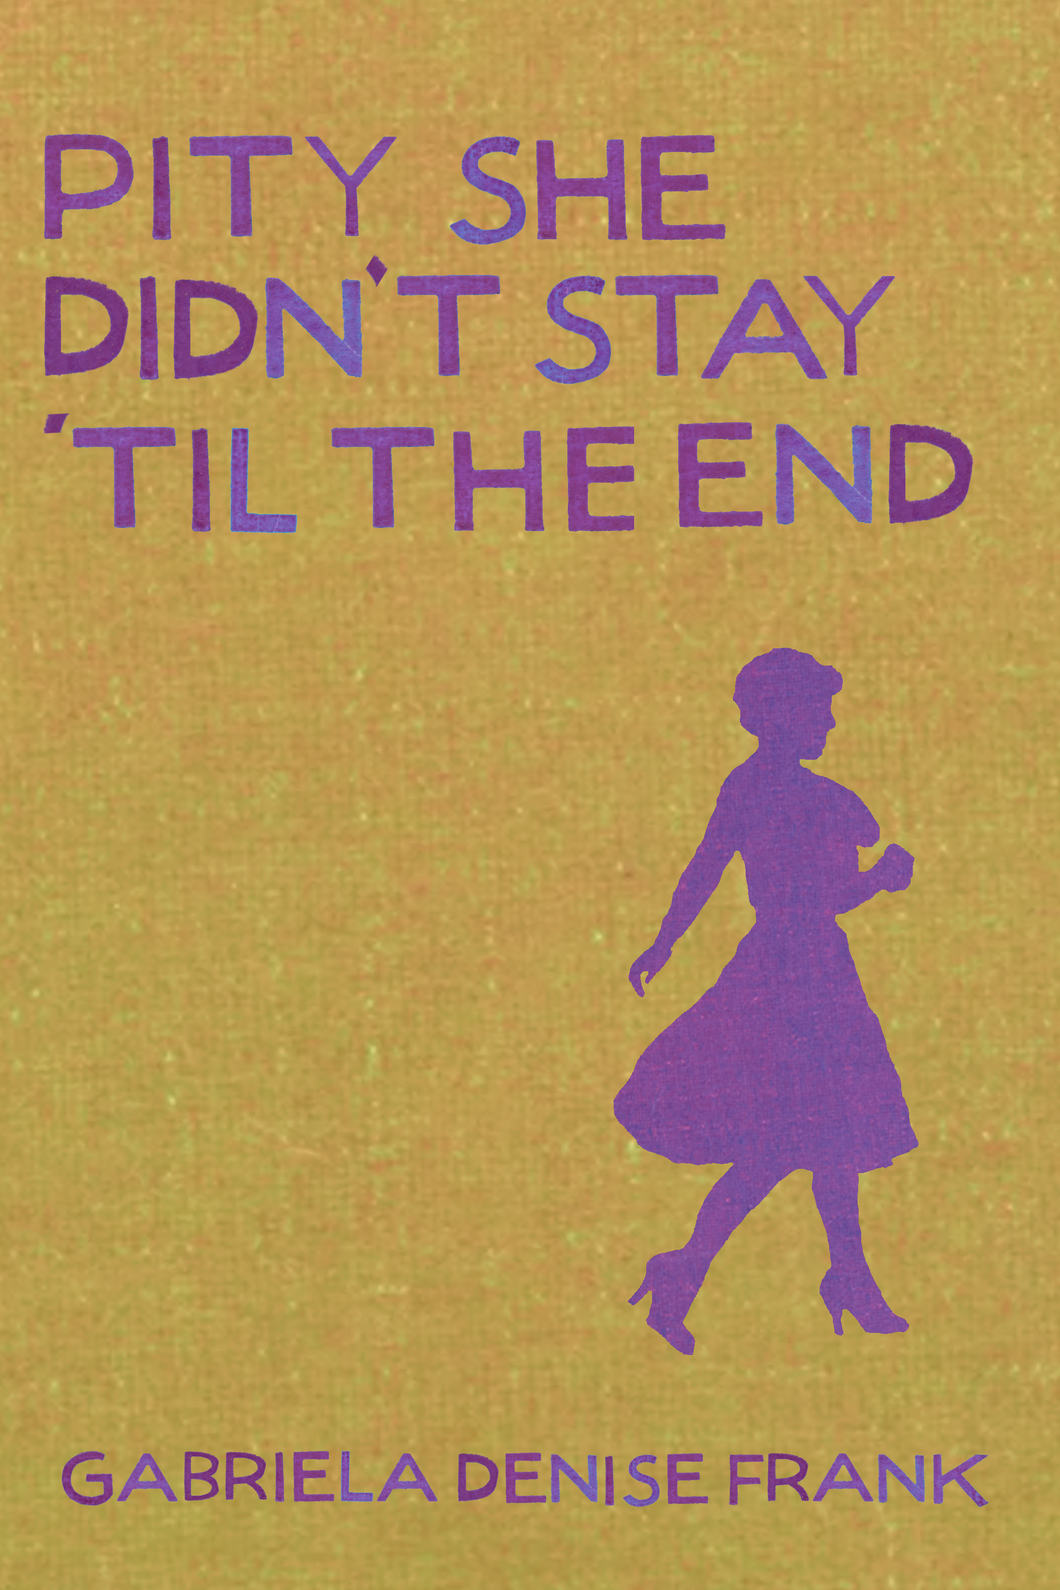 Pity She Didn't Stay 'Til the End, by Gabriela Denise Frank-Print Books-Bottlecap Press